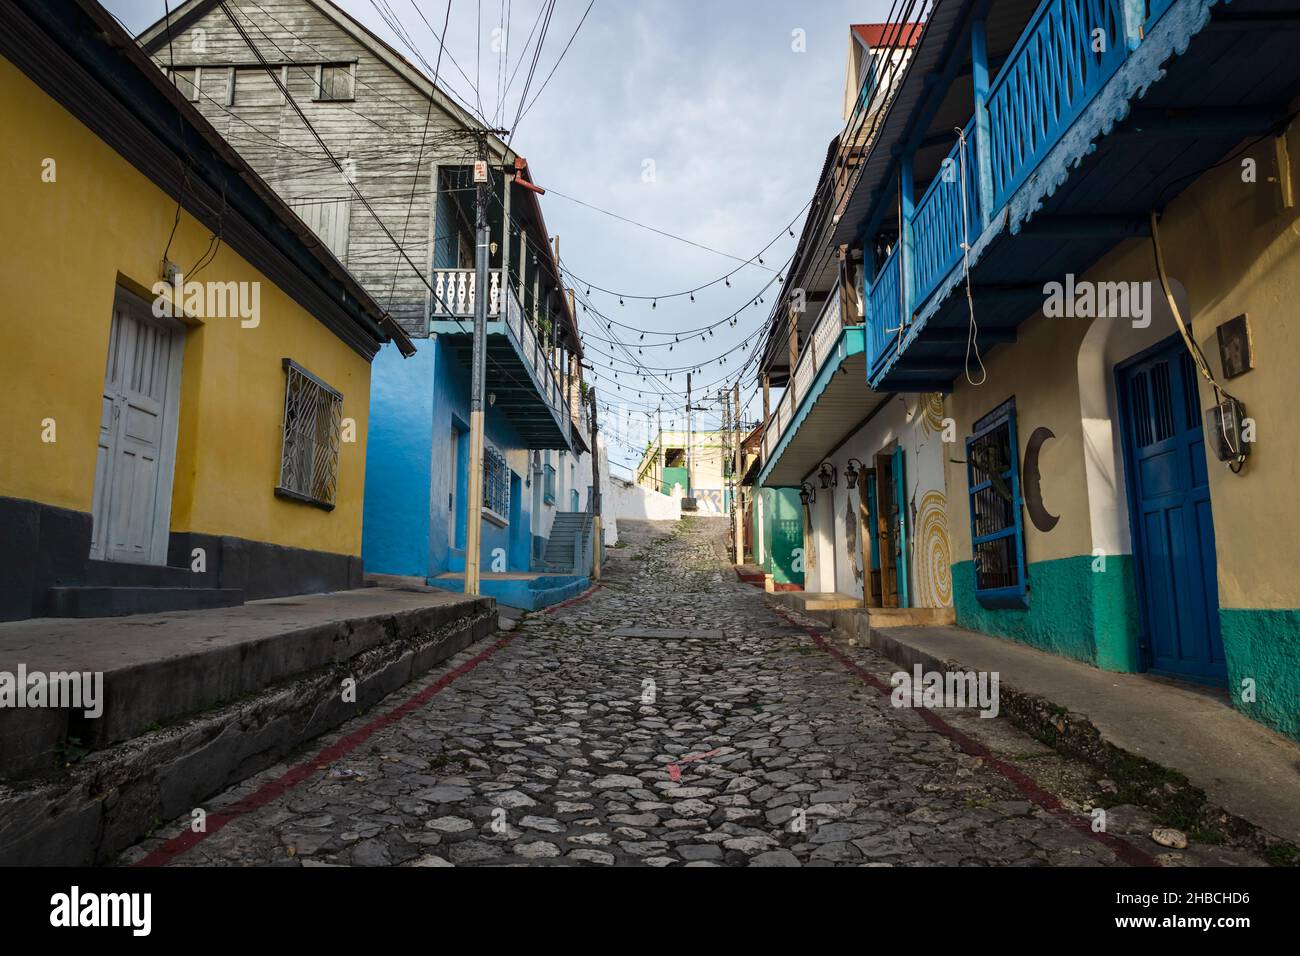 Colonial cobblestone street with colorful painted houses in Flores, Peten, Guatemala Stock Photo